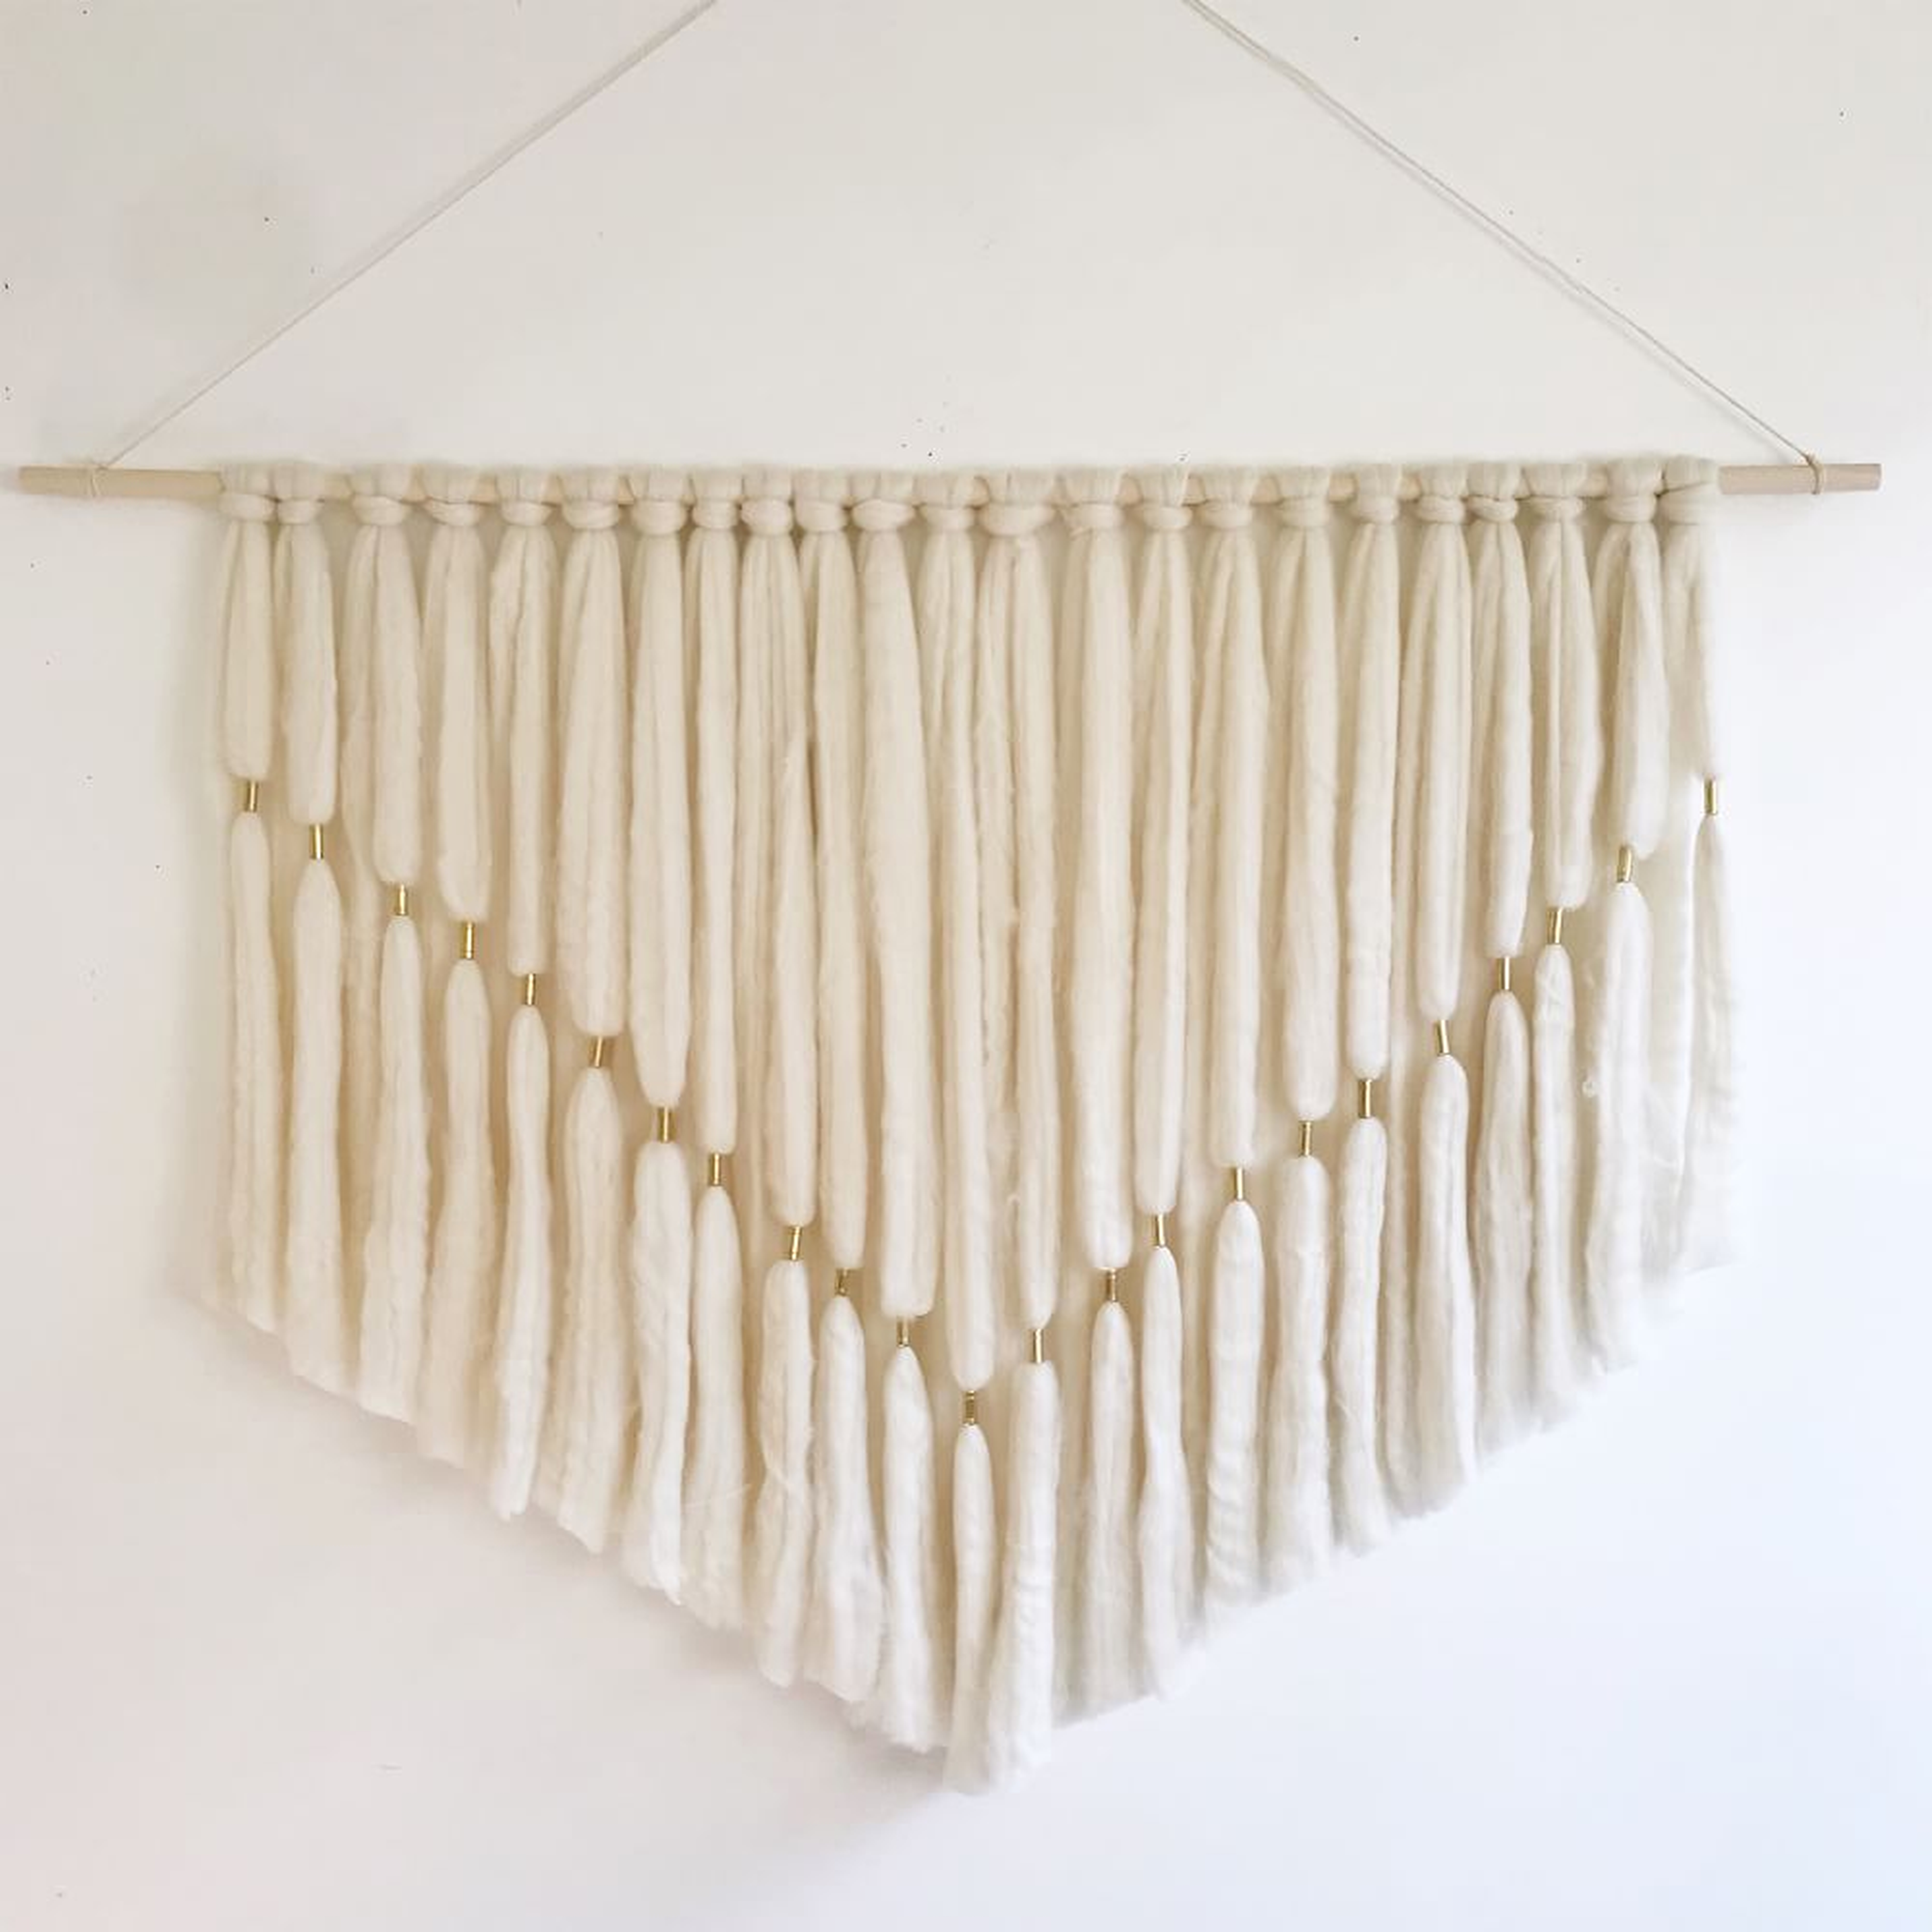 Roving Wall Hanging - West Elm